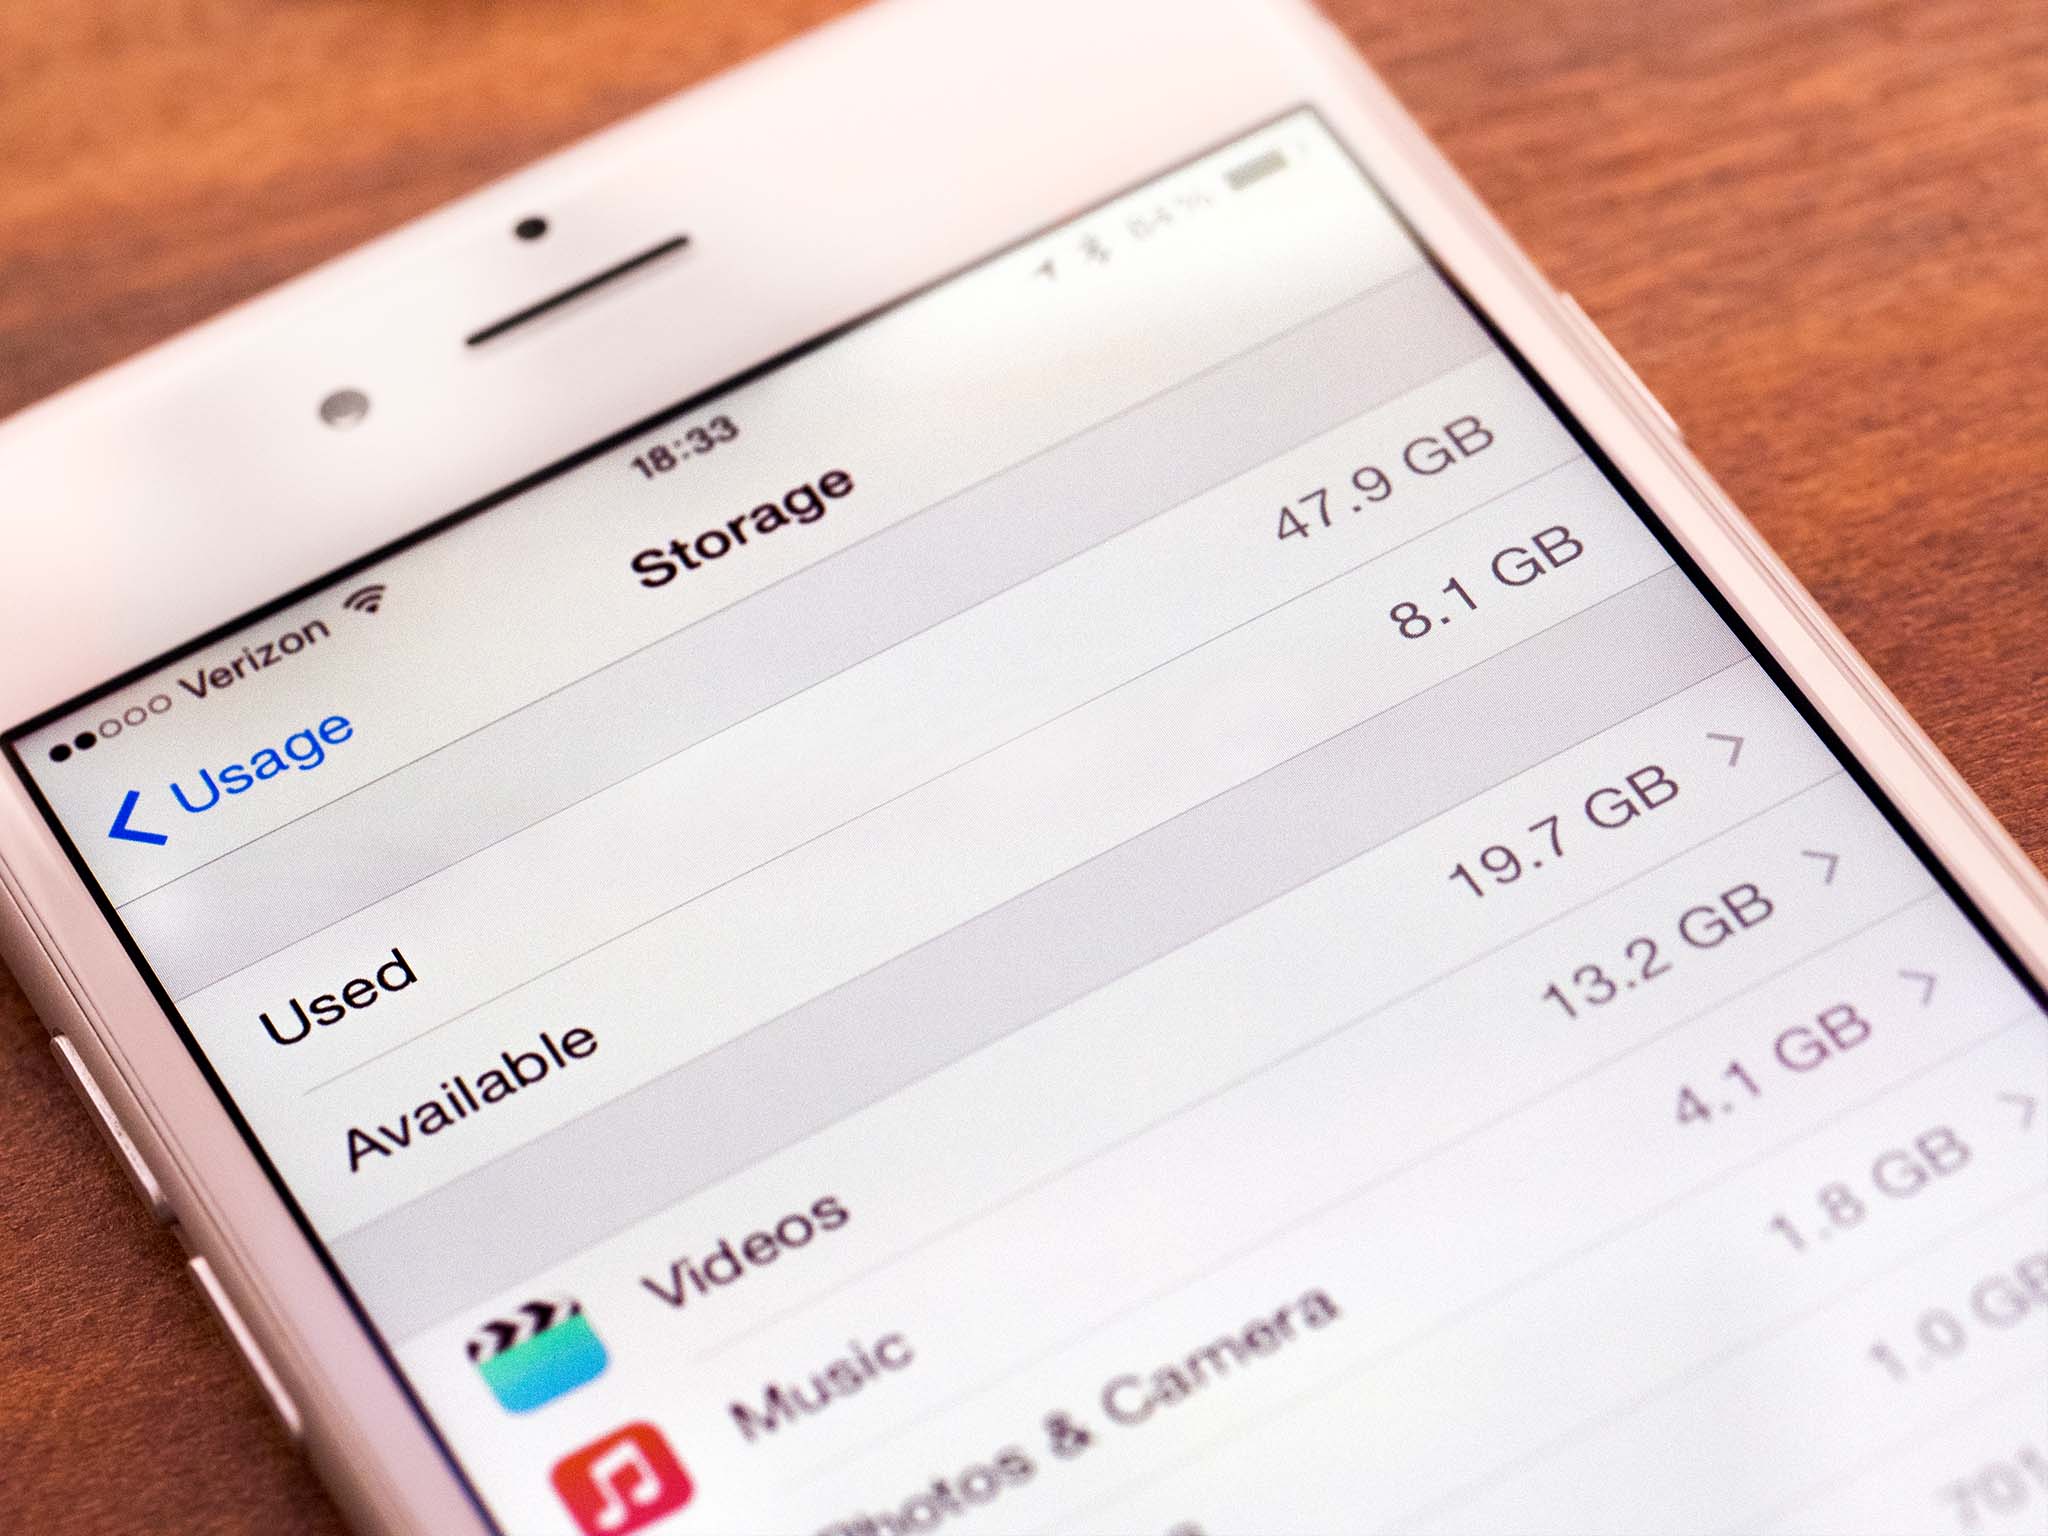 Lawsuit filed over not understanding iPhone storage sizes